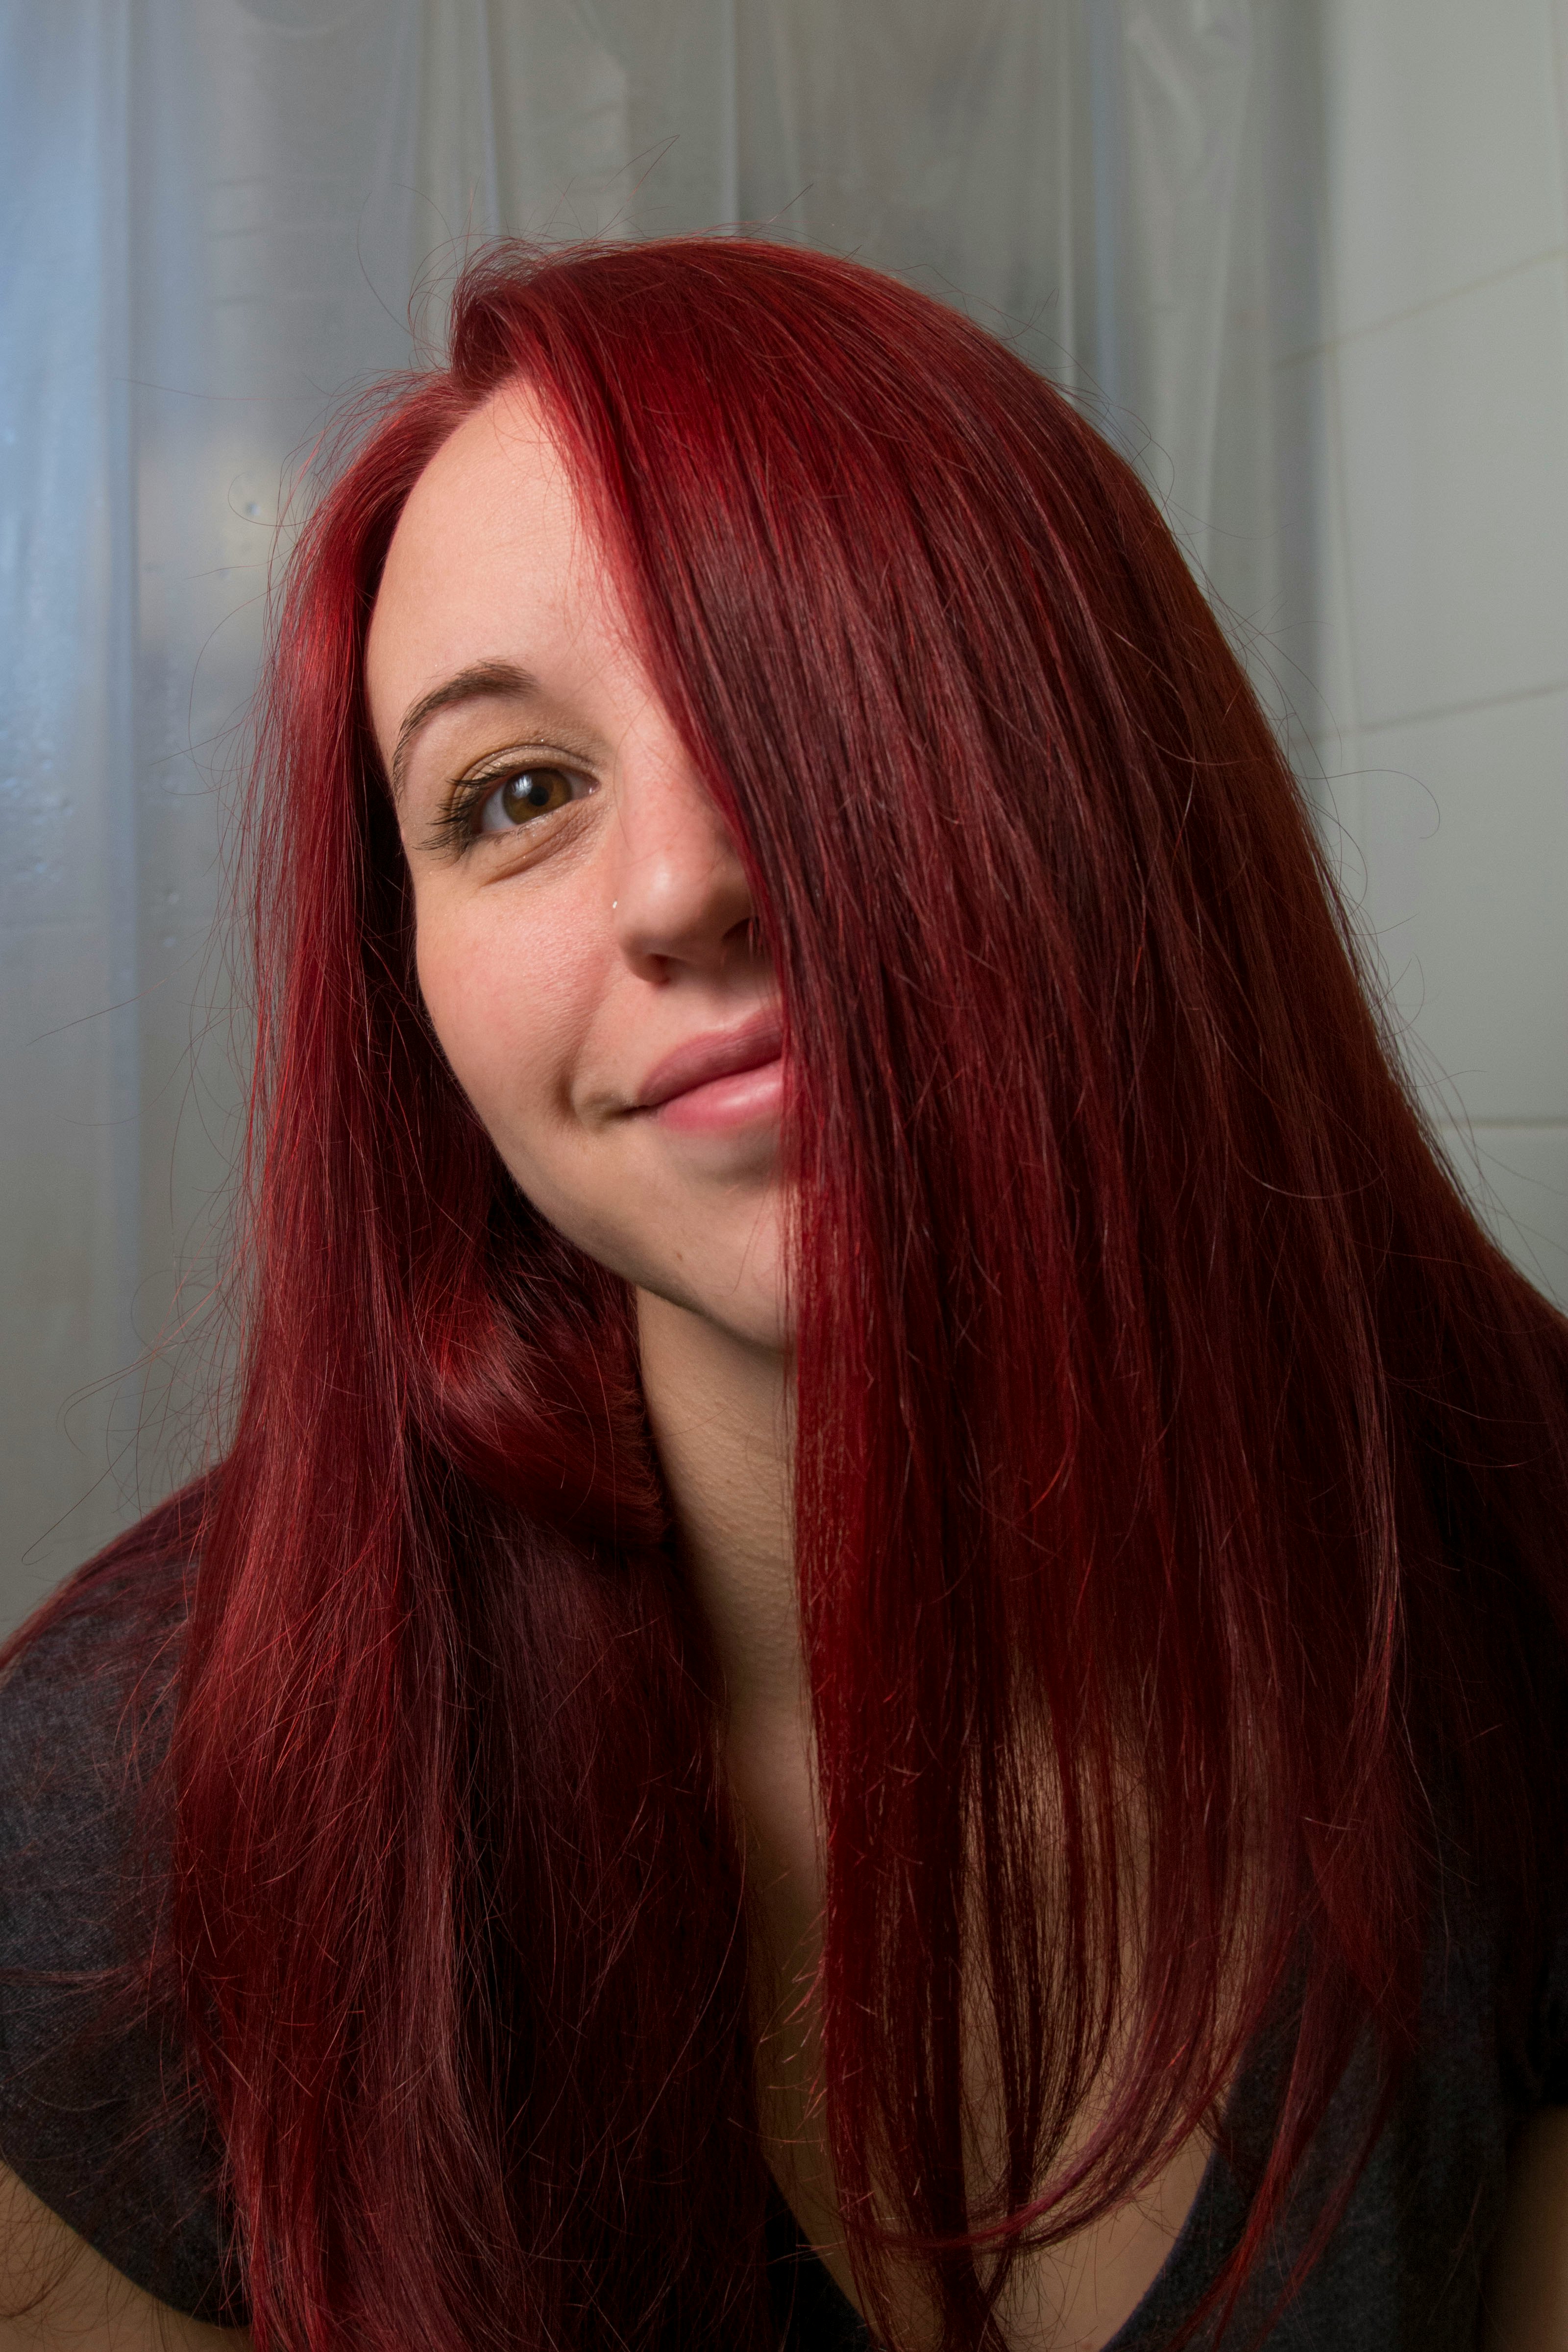 How To Get Out Red Hair Dye : My Hair Color - How To Get Dark Red Hair!! | Dark red hair ...